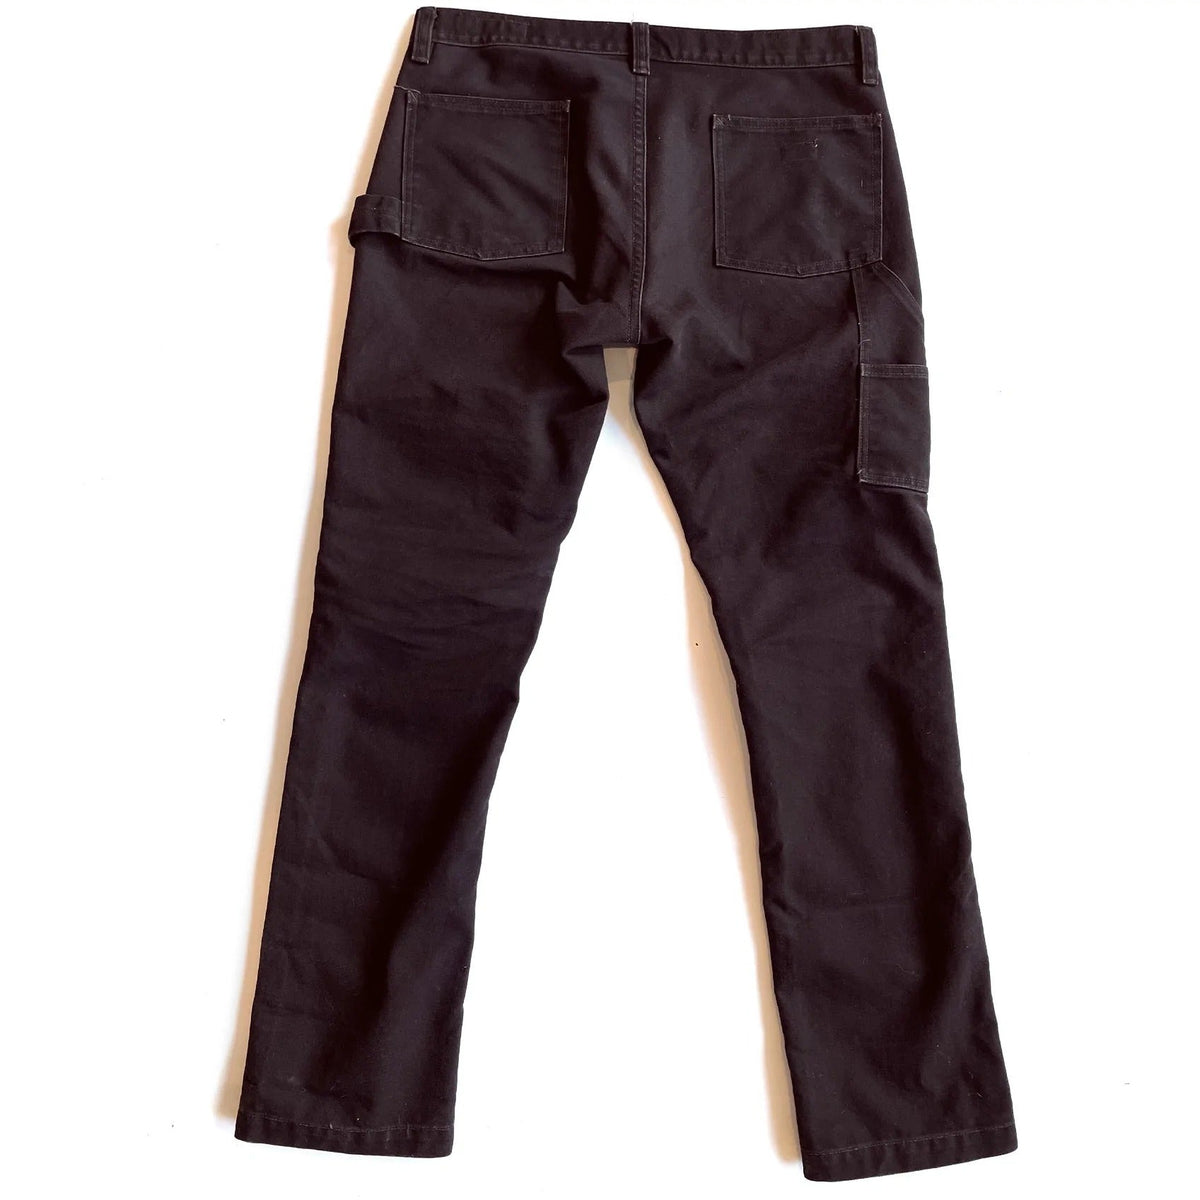 (2ND) Union (Double Knee) Work Pant - Espresso - grown&amp;sewn